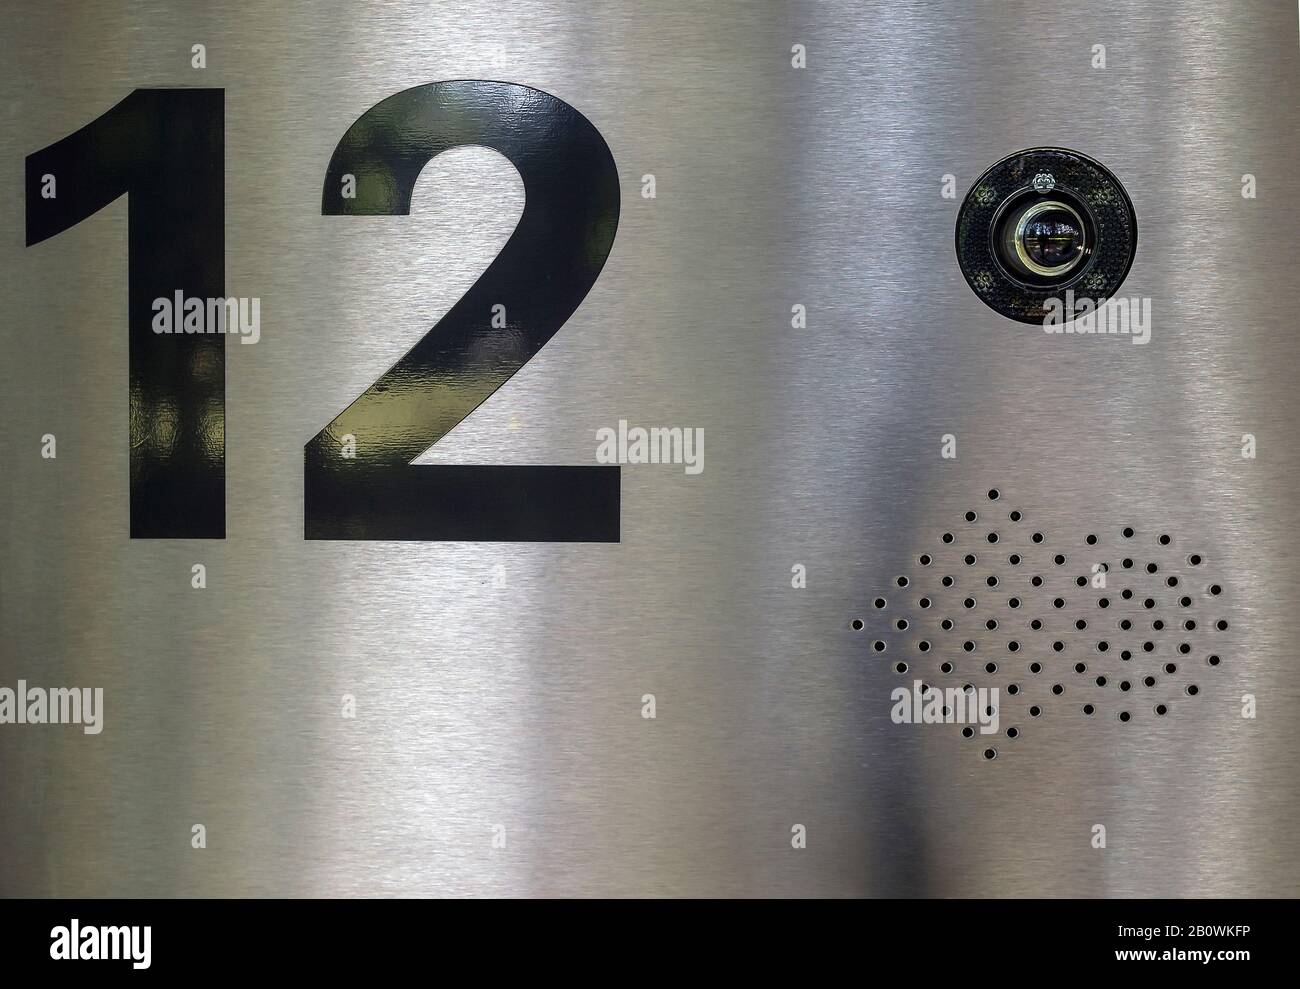 House number with surveillance camera Stock Photo